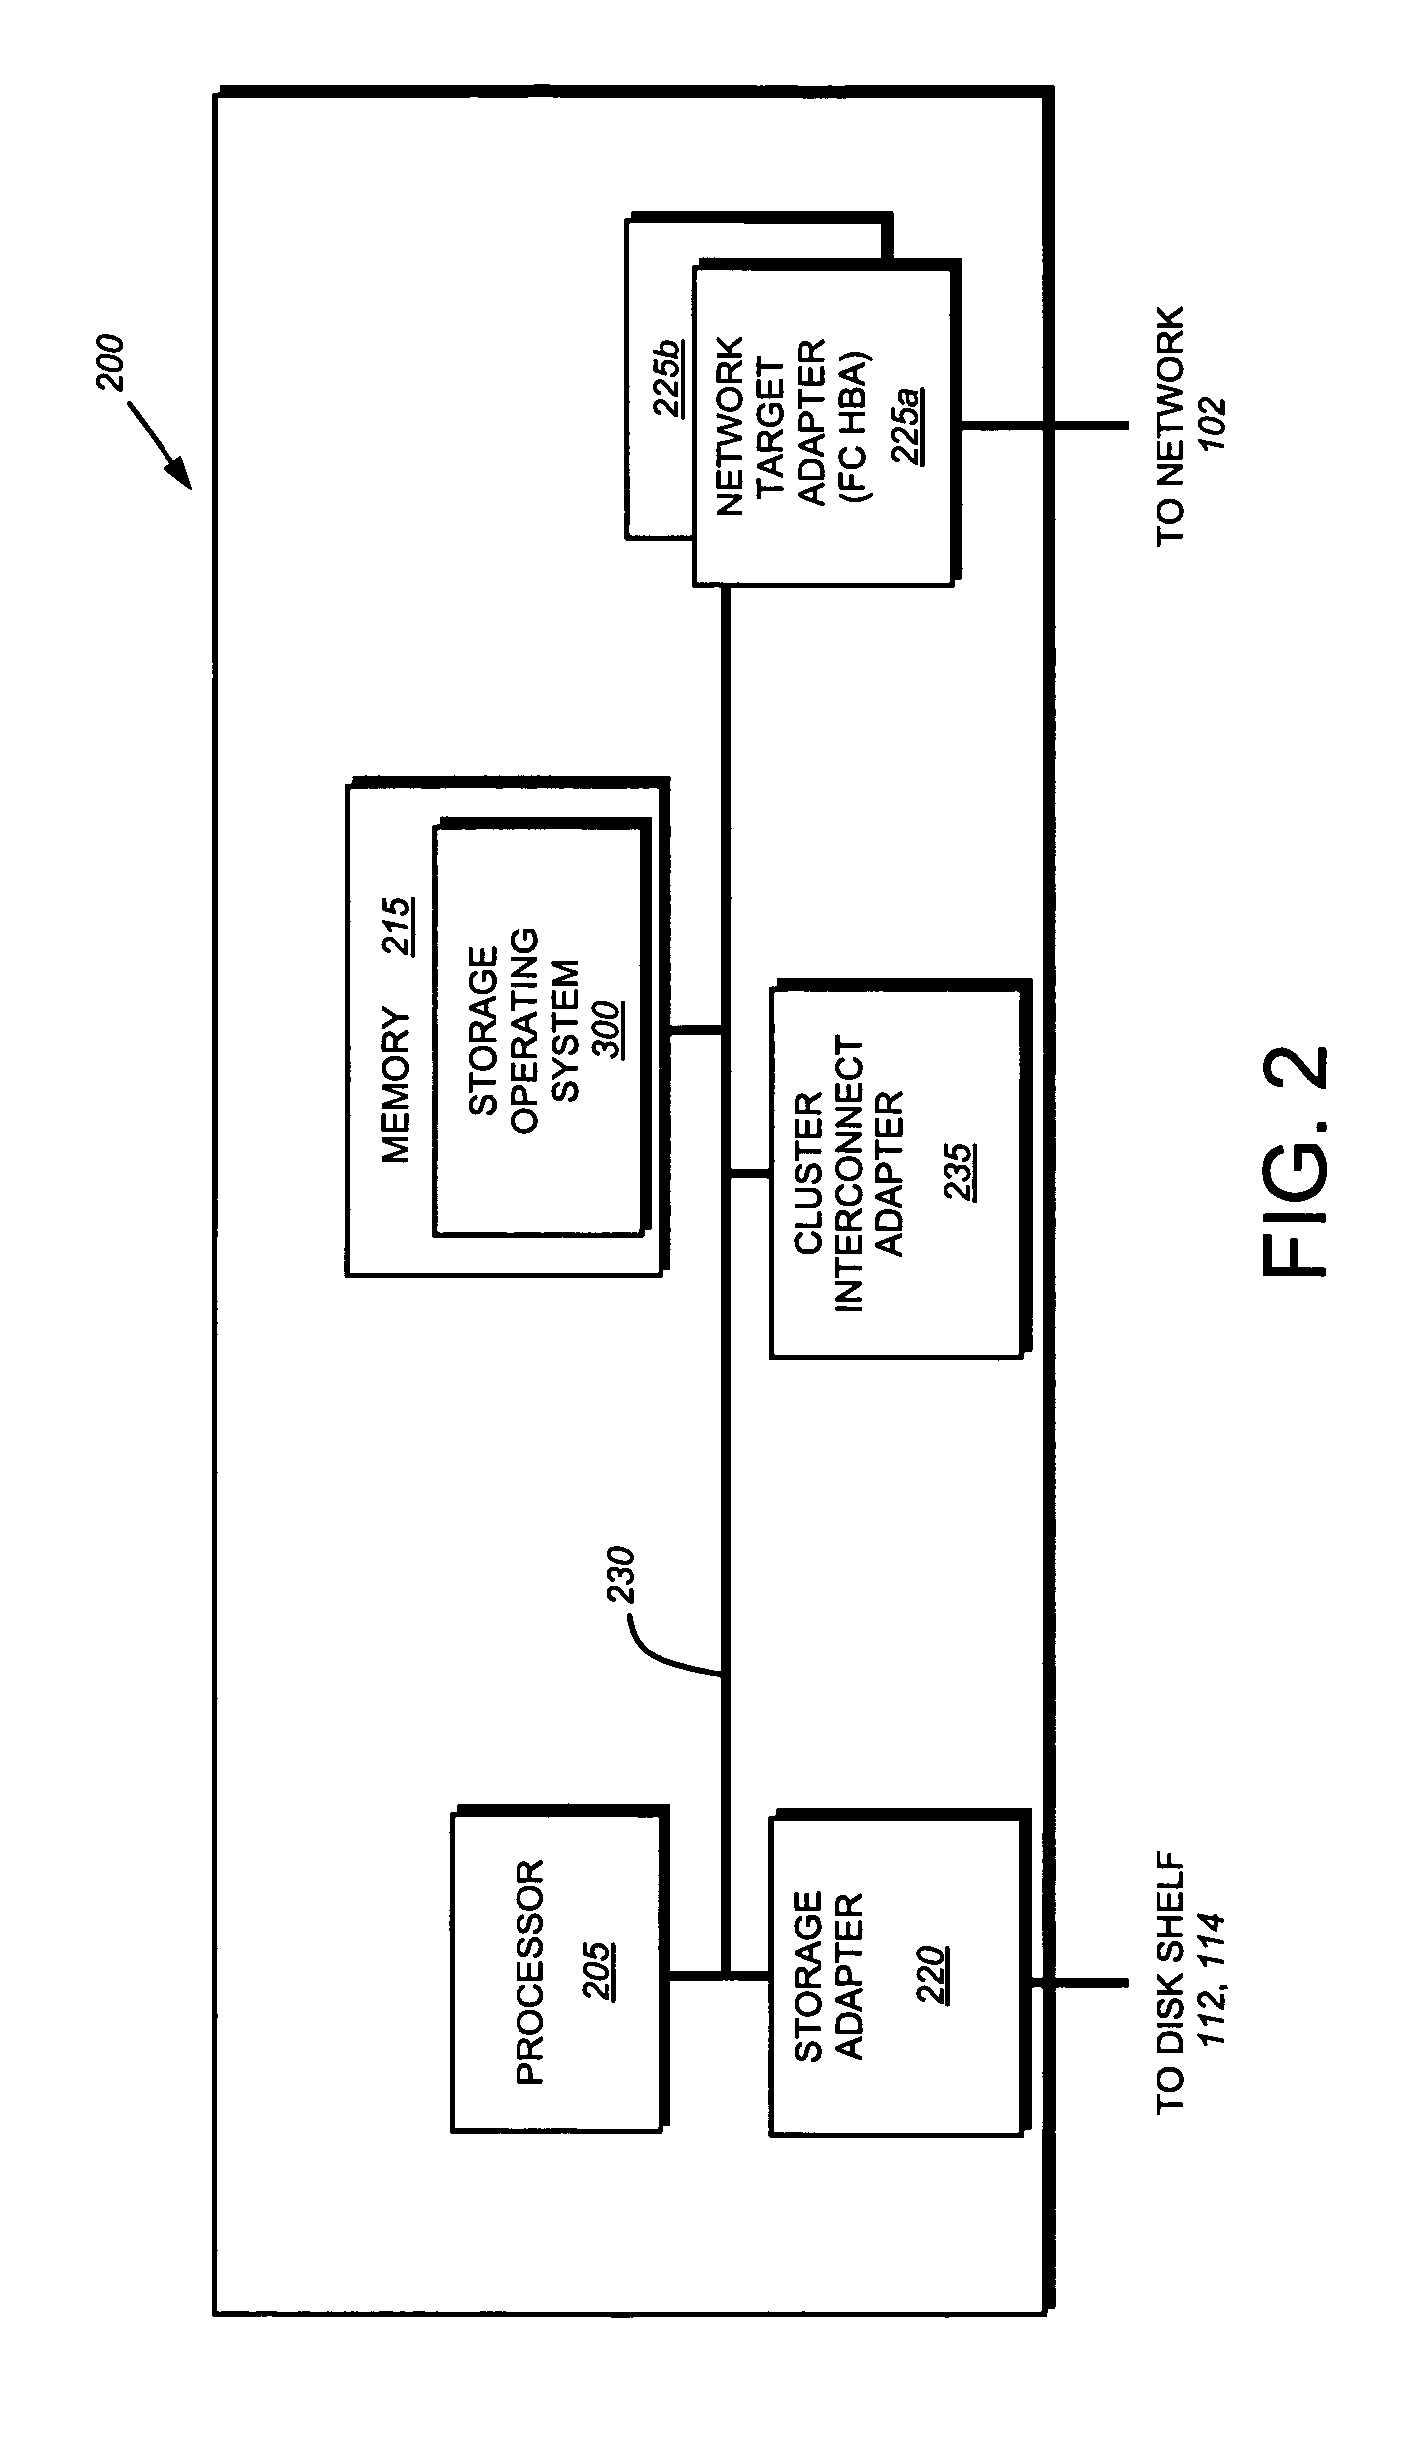 System and method for proxying data access commands in a clustered storage system